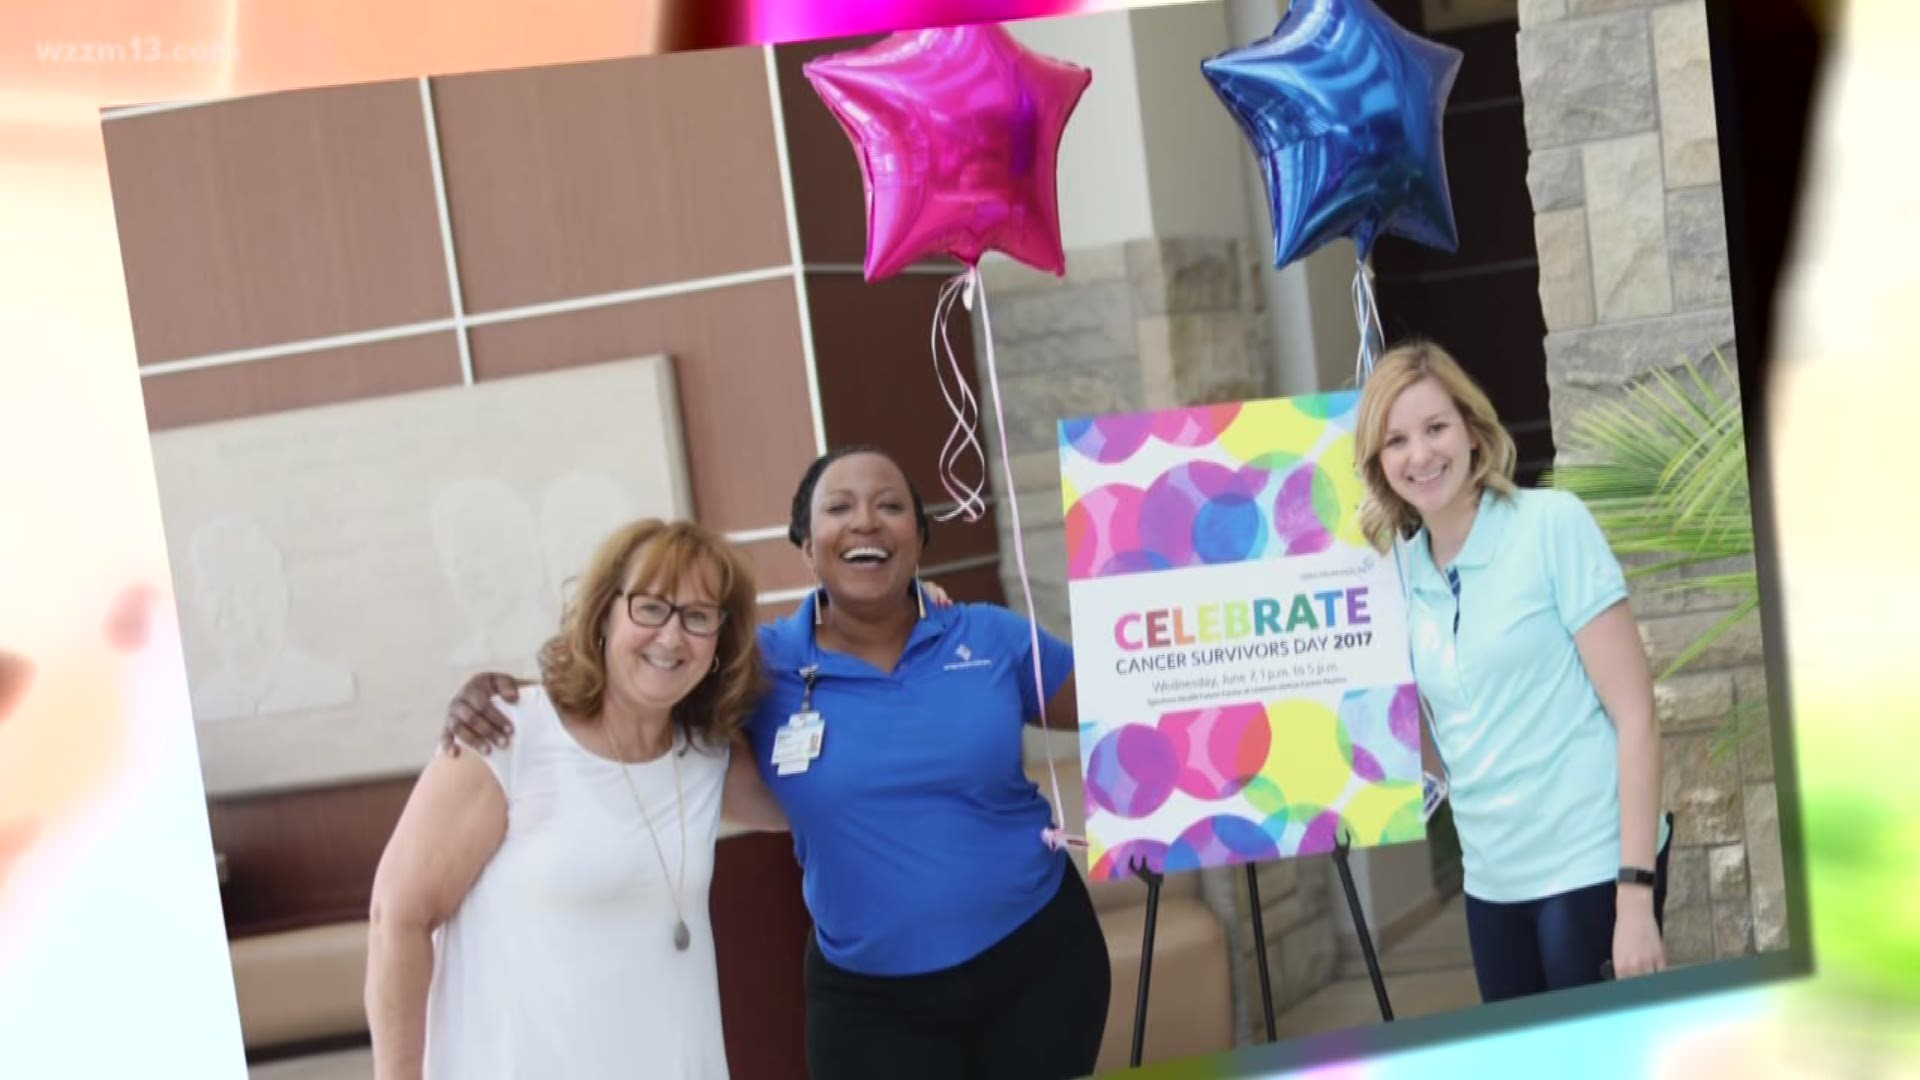 The first Sunday in June is National Cancer Survivors’ Day, which is an annual, treasured celebration of life that is held in hundreds of communities nationwide. Spectrum Health will celebrate with a special event and the community is invited to attend.